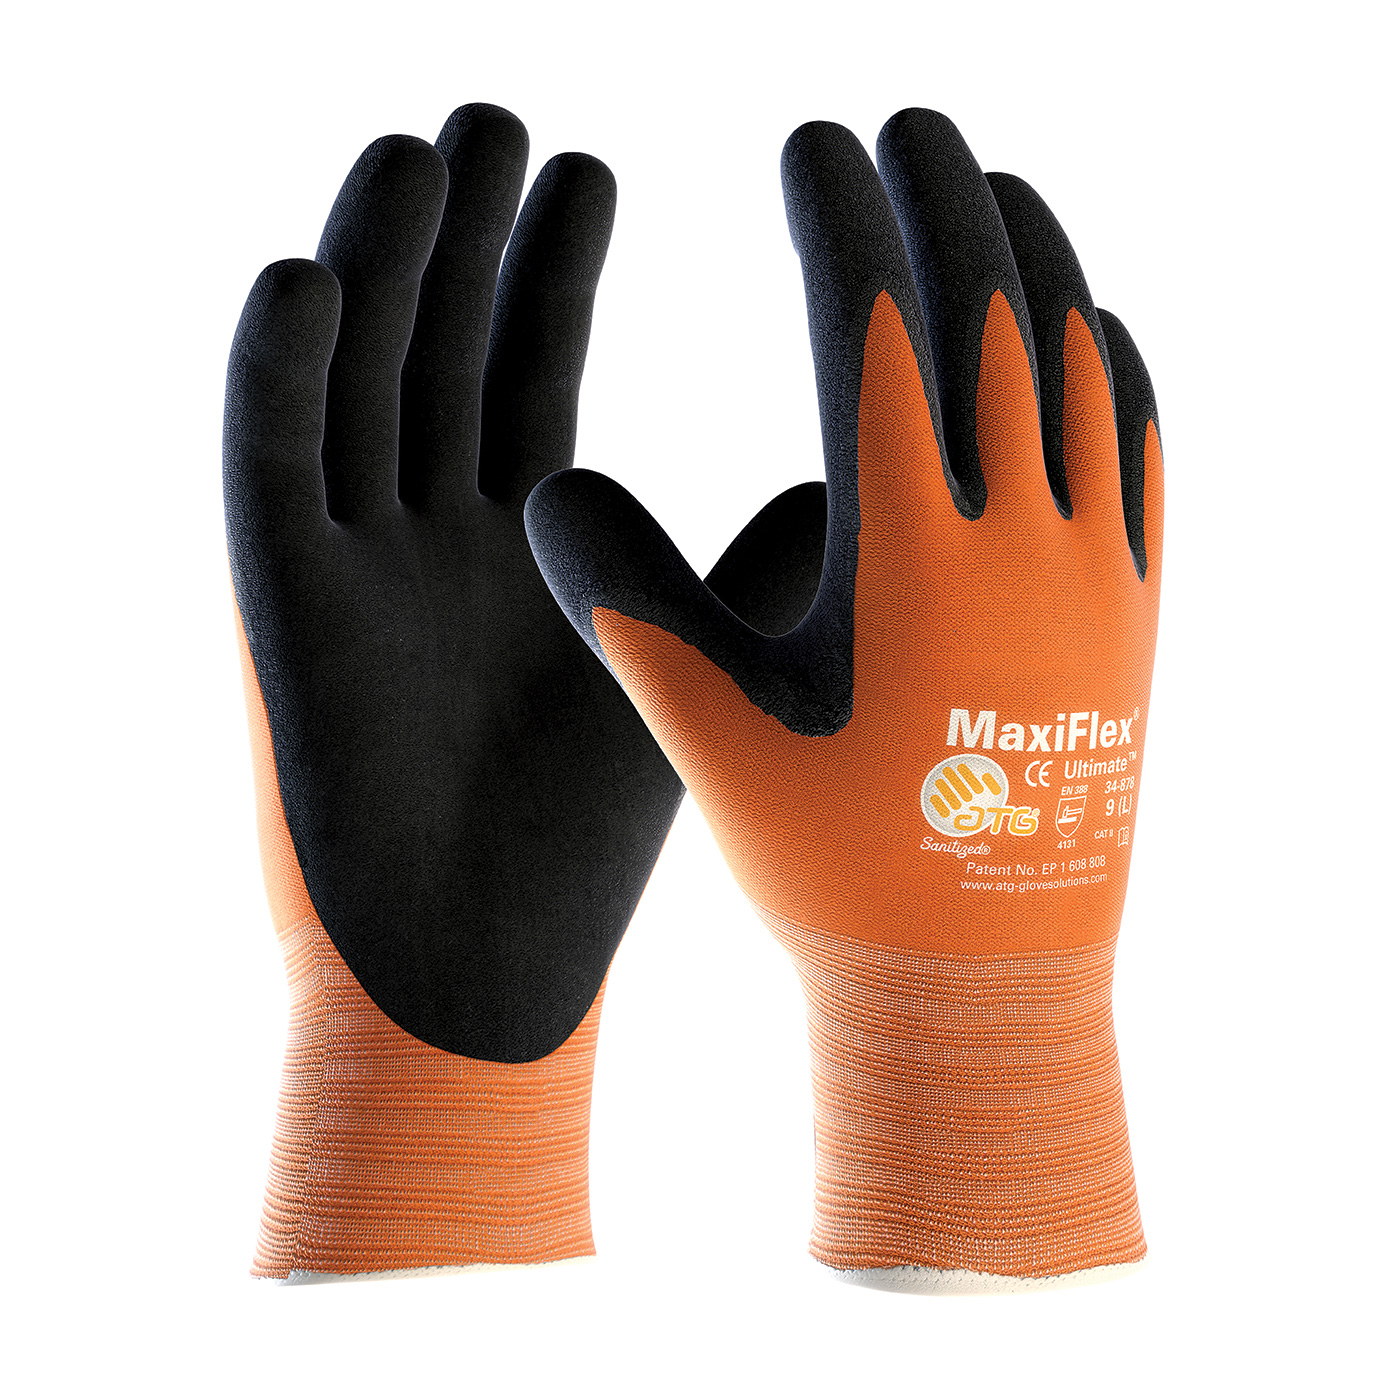 PIP 34-8014/XL MaxiFlex Ultimate Hi-Vis Seamless Knit Nylon Glove with Nitrile Coated MicroFoam Grip on Palm & Fingers - X-Large PID-34 8014 XL